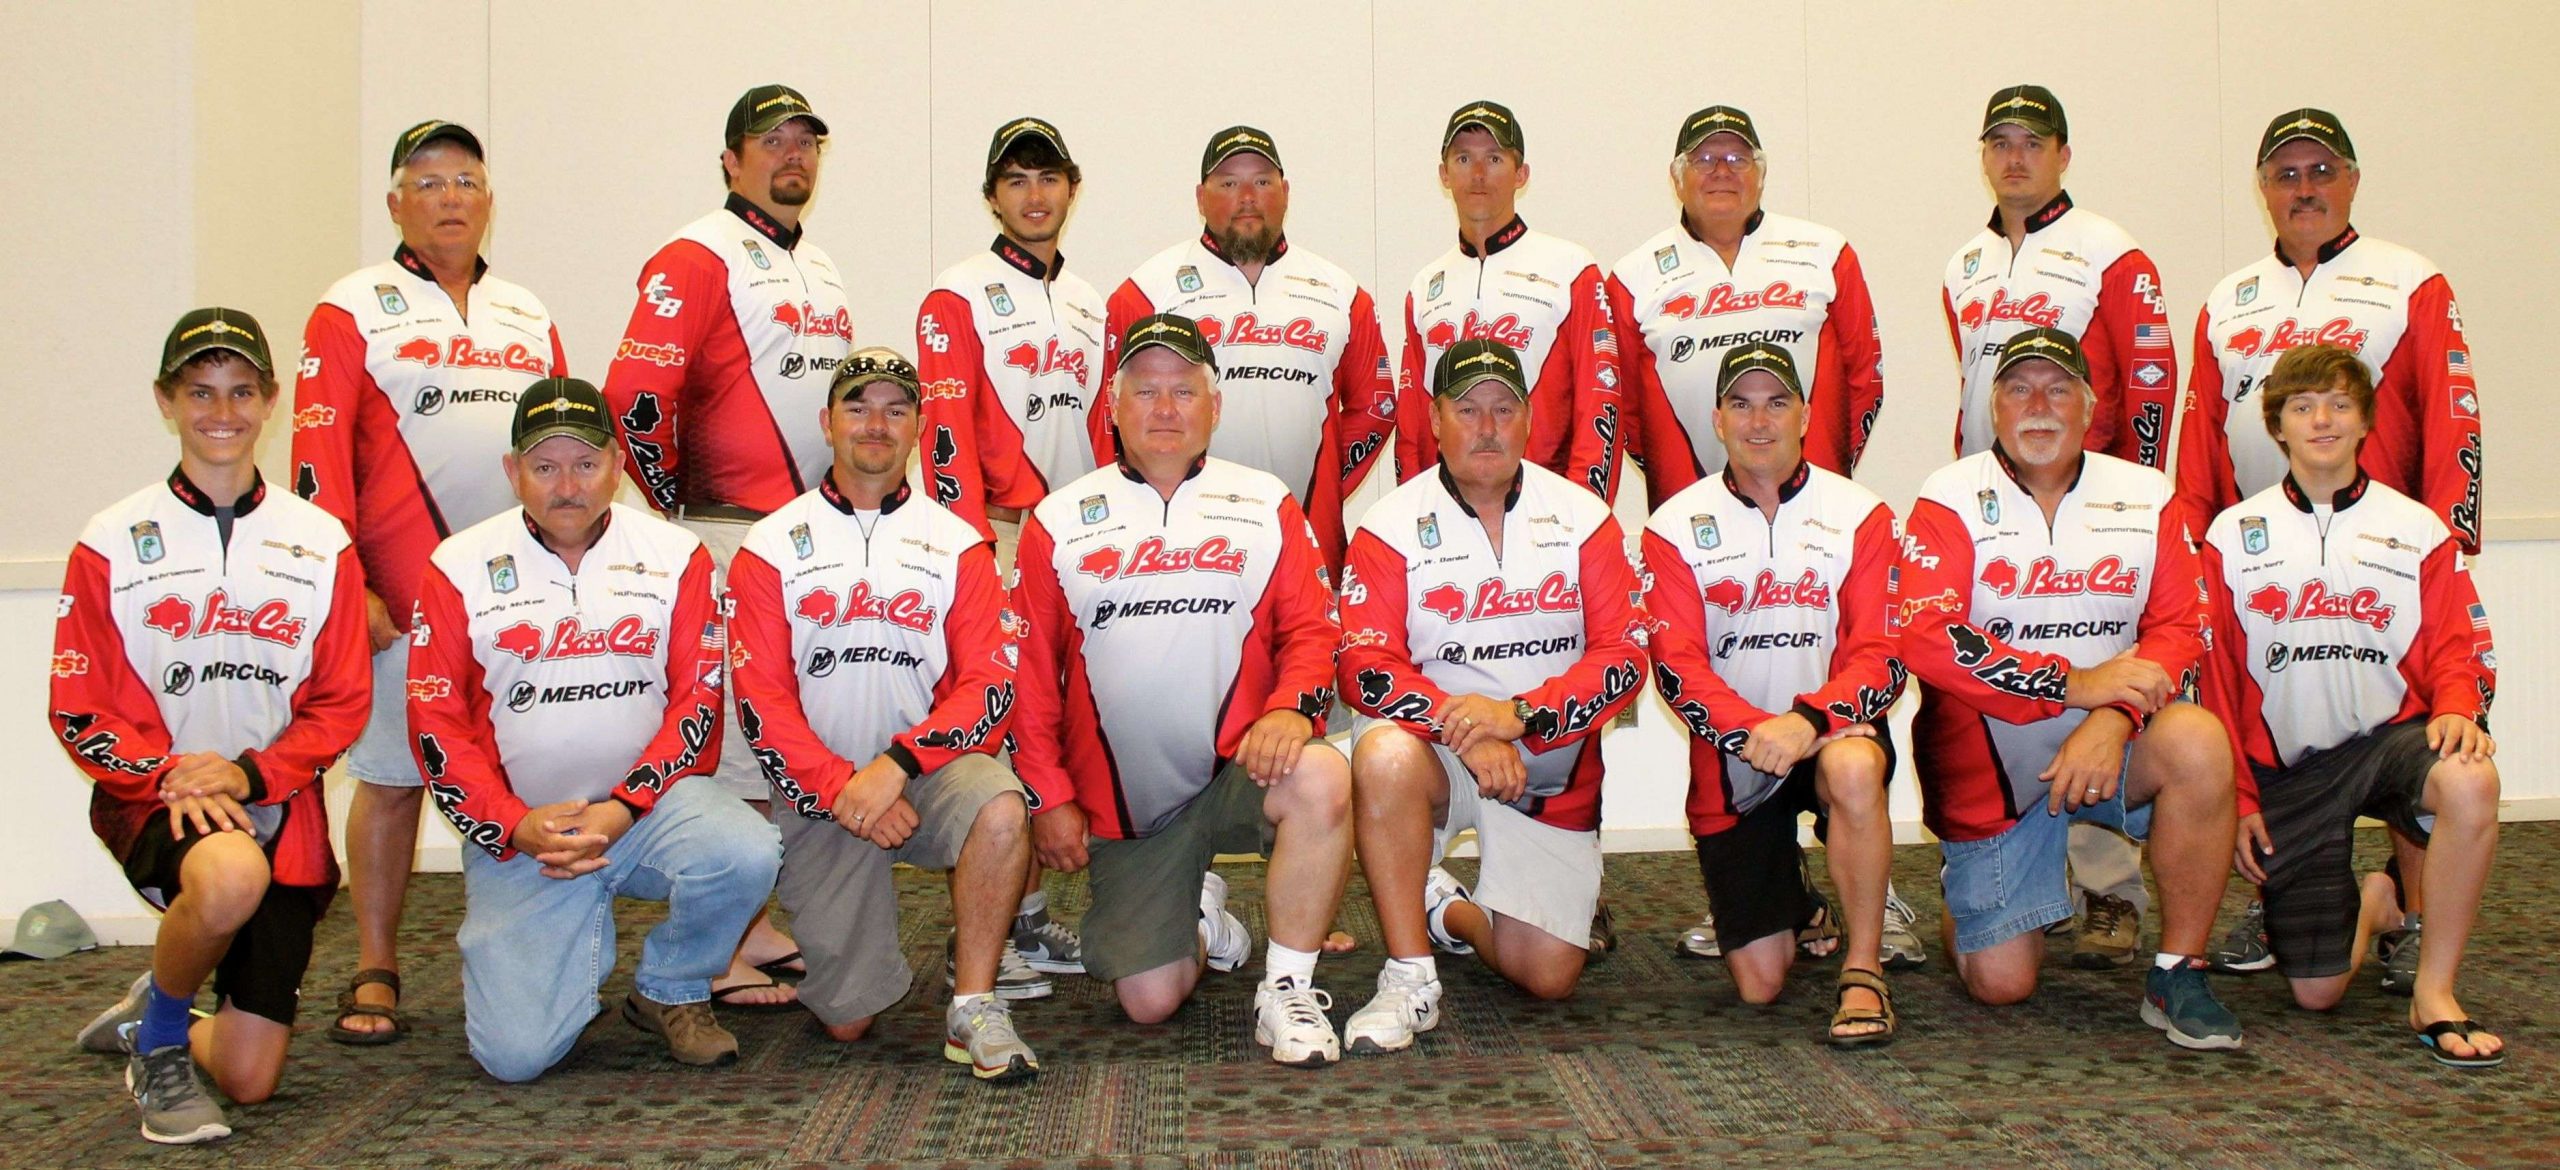 Meet the teams participating in this week's B.A.S.S. Nation Central Divisional on Lake Eufaula in McAlester, Okla. We start with Team Arkansas. The Arkansas B.A.S.S. Nation Central Divisional team comprises: (Back row, l to r) Michael Smith, JD Hill, Dustin Blevins, Harvey Horne, Josh Wray, Jack Wood, Kris Cooley, Jim Alexander (president); and Dayten Schureman (high school team), Randy McKee, Tray Huddleston, David Frank, Gary Daniel, Mark Stafford, Duaine Fears and Calvin Neff (high school team).